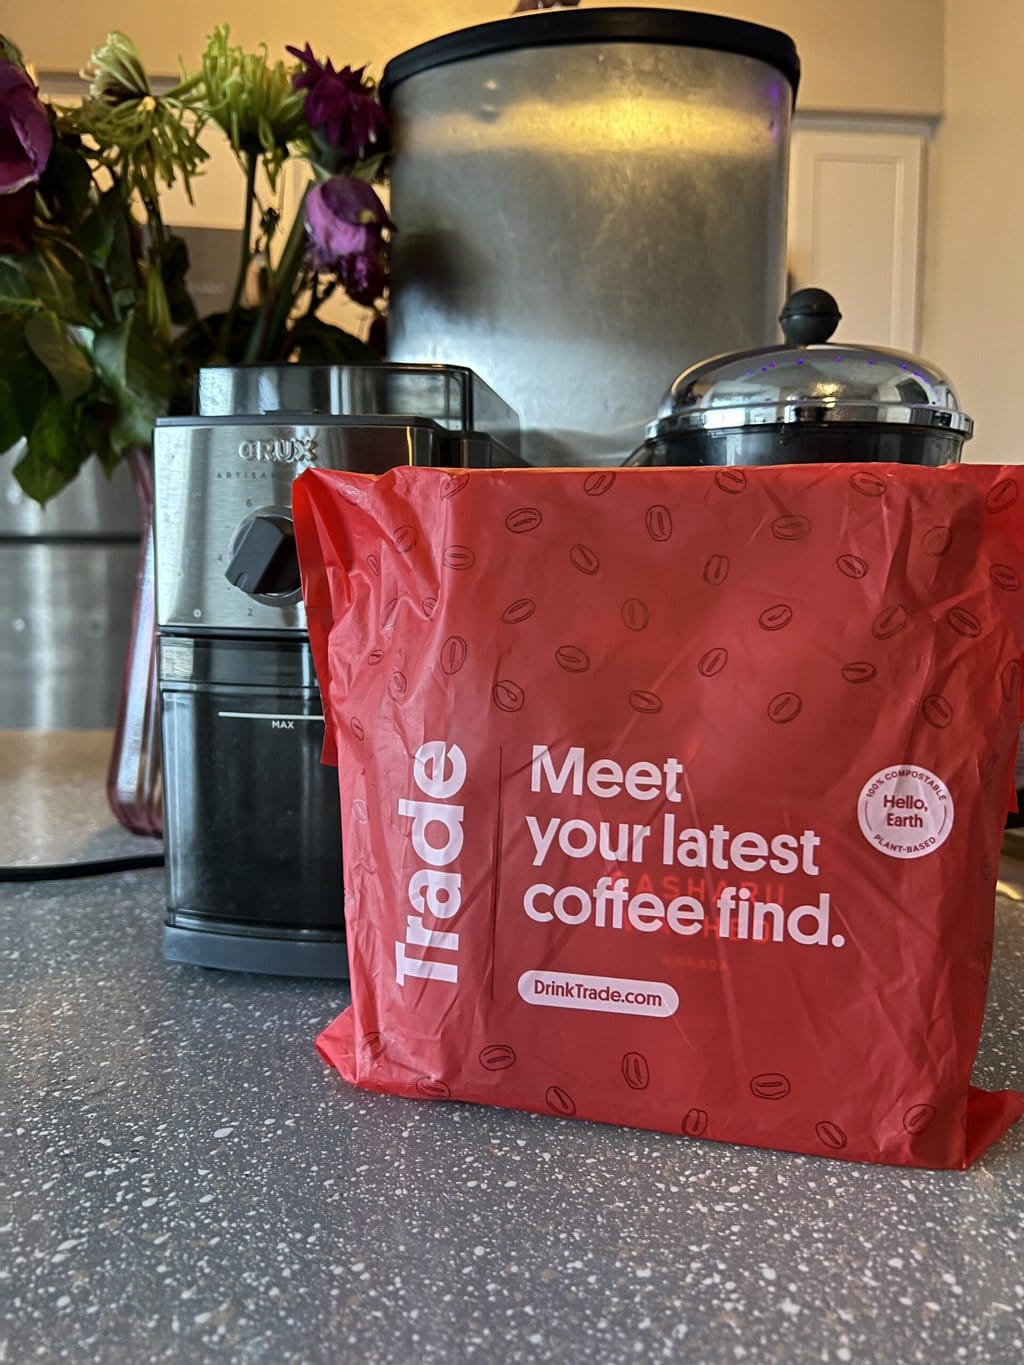 Madcap coffee in a red package against the background of a coffee grinder and a french press